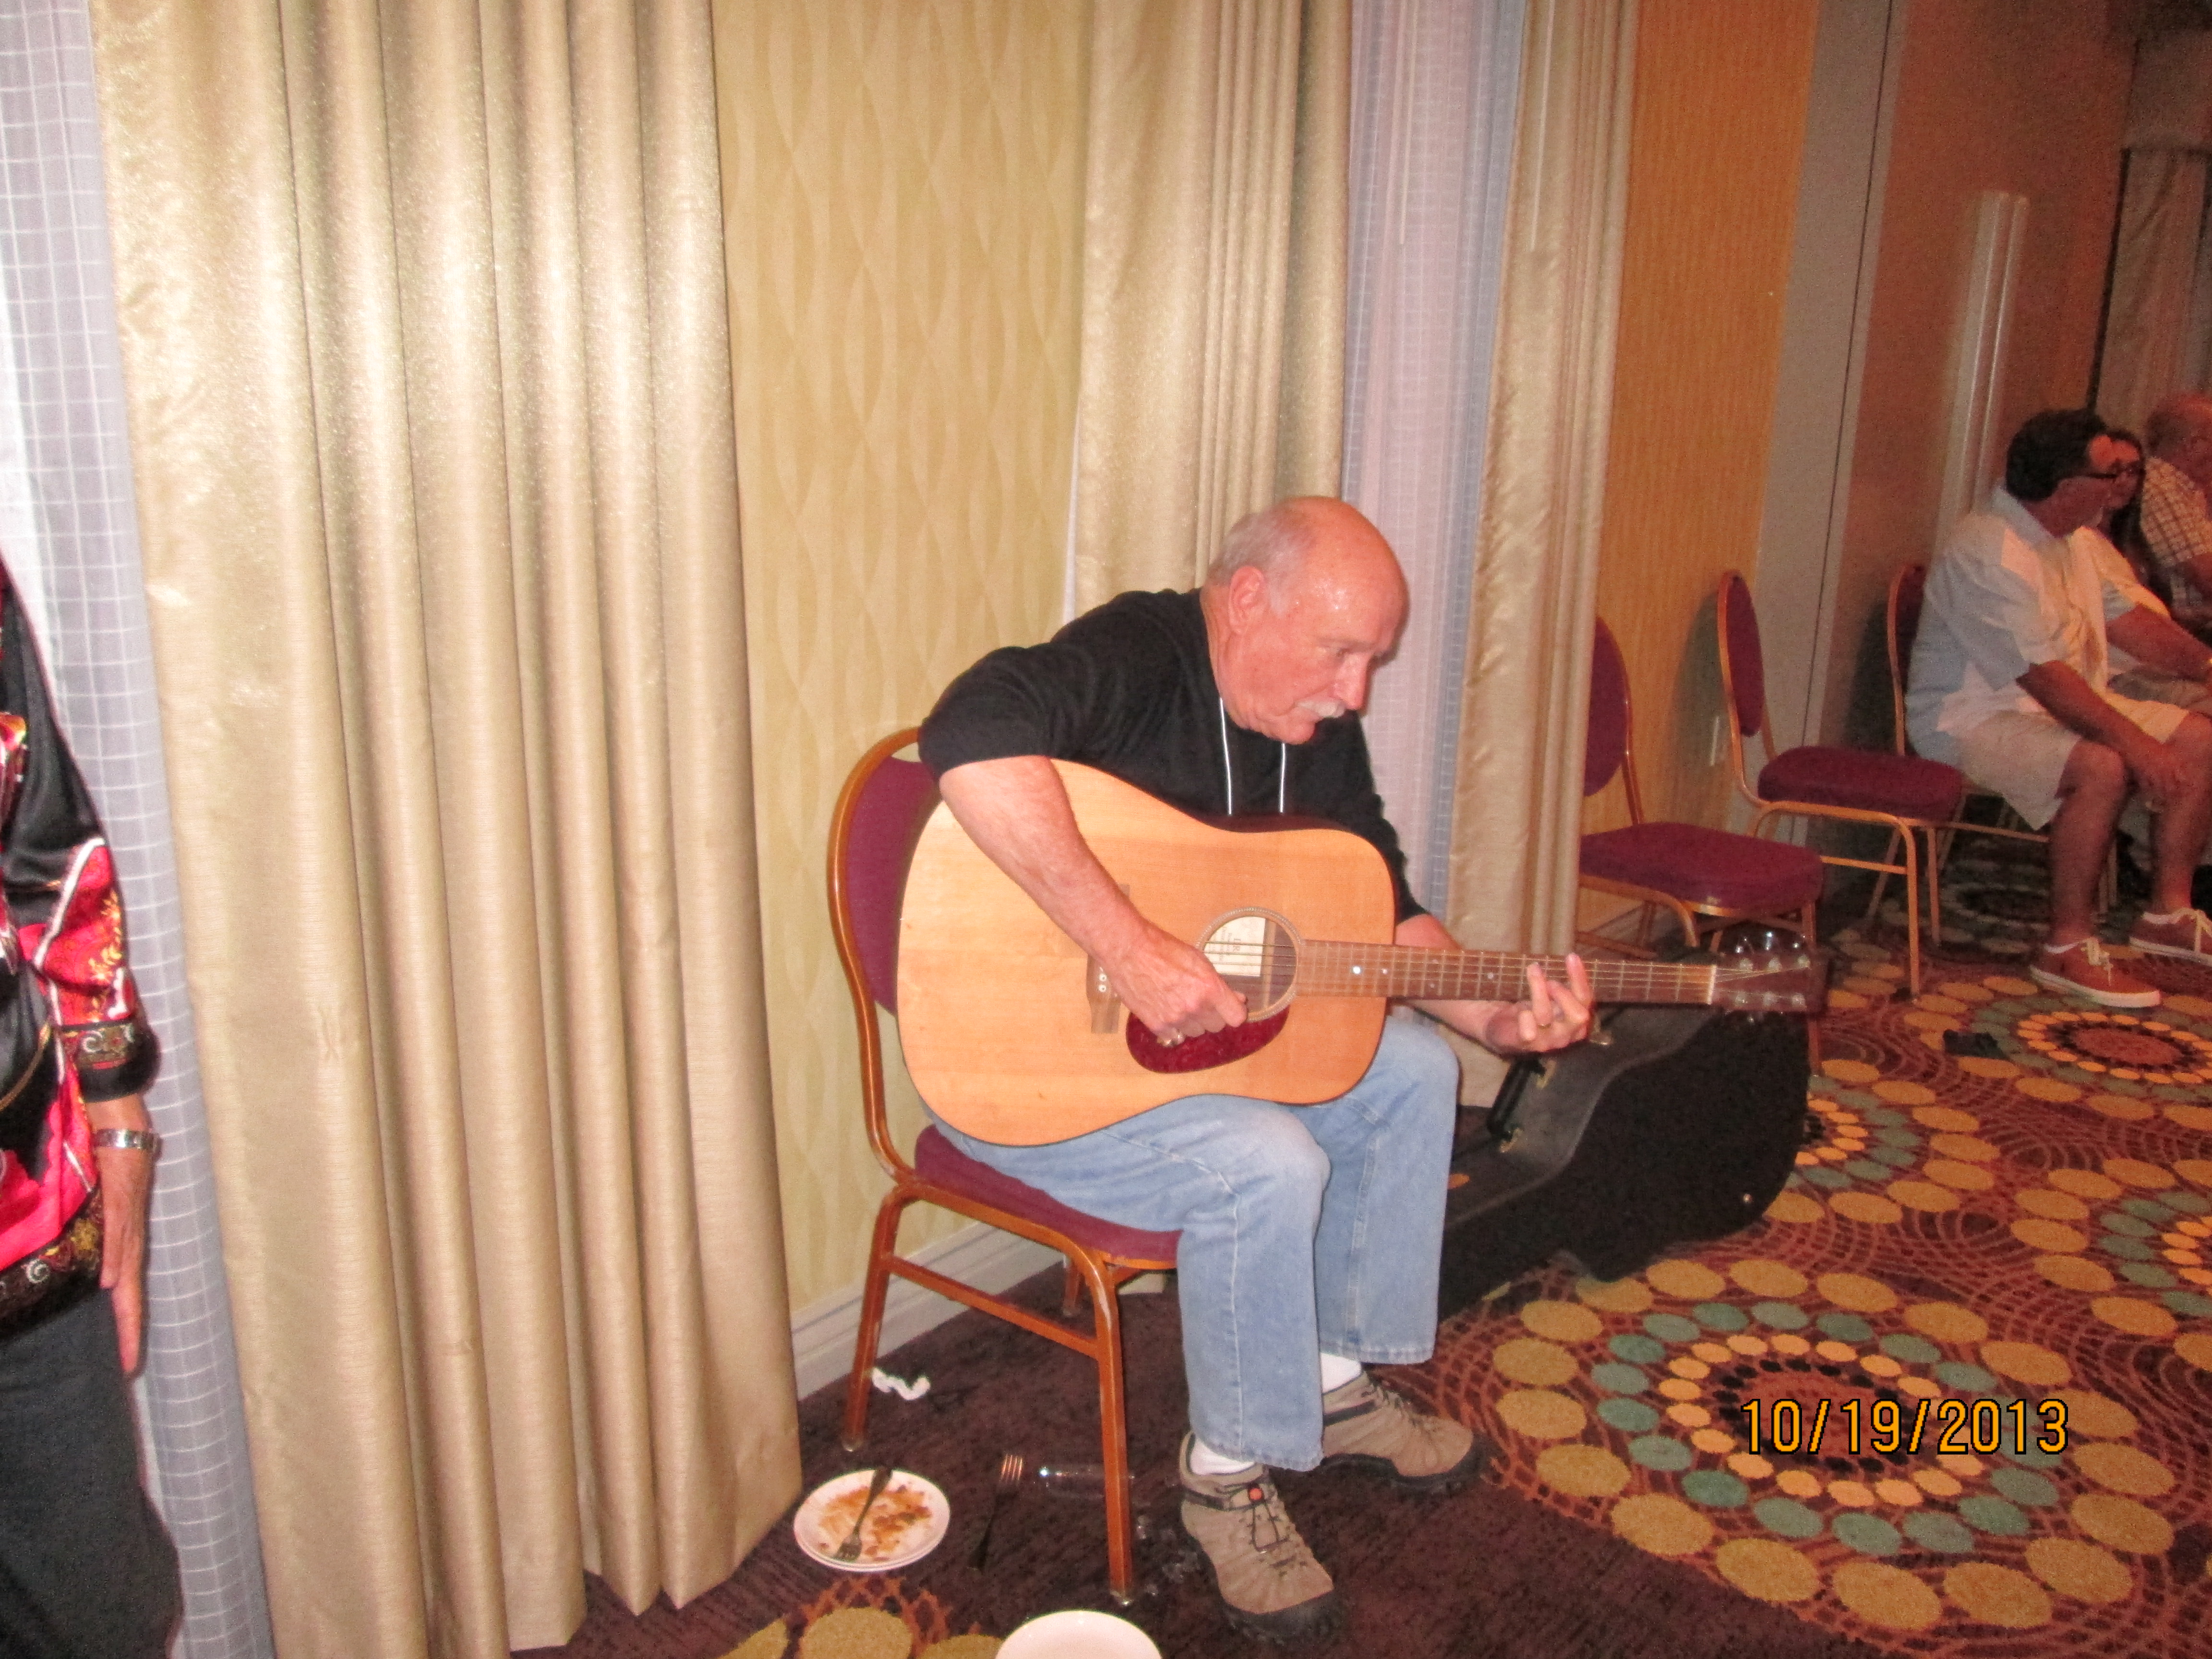 Mike Barmore playing at the Meet and Greet Mixer on Friday evening October 18, 2013.  The date is wrong on the picture due to the camera being set to Eastern Time Zone.